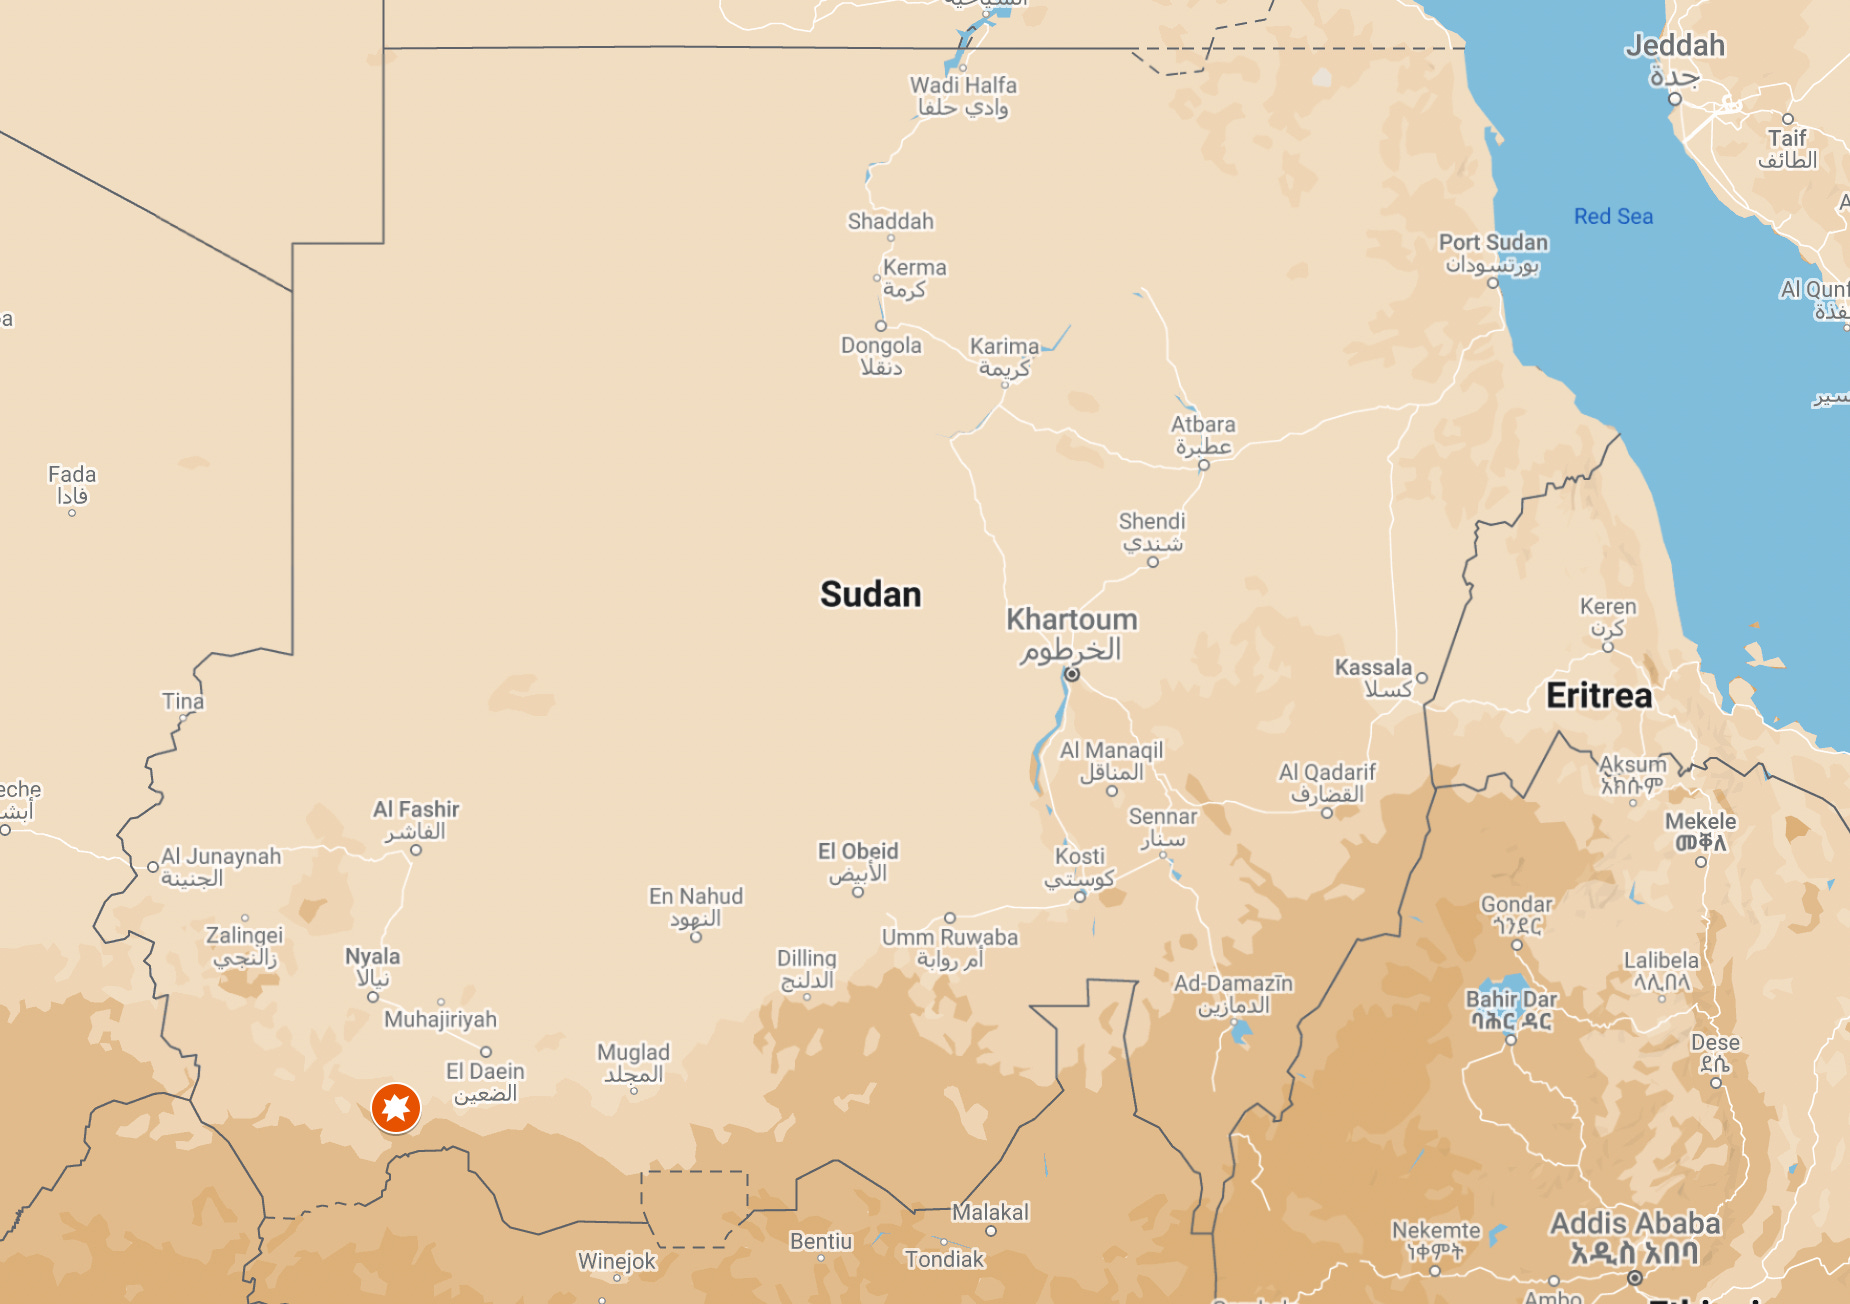 Sudan war escalates as paramilitary forces aim for complete control of  Darfur